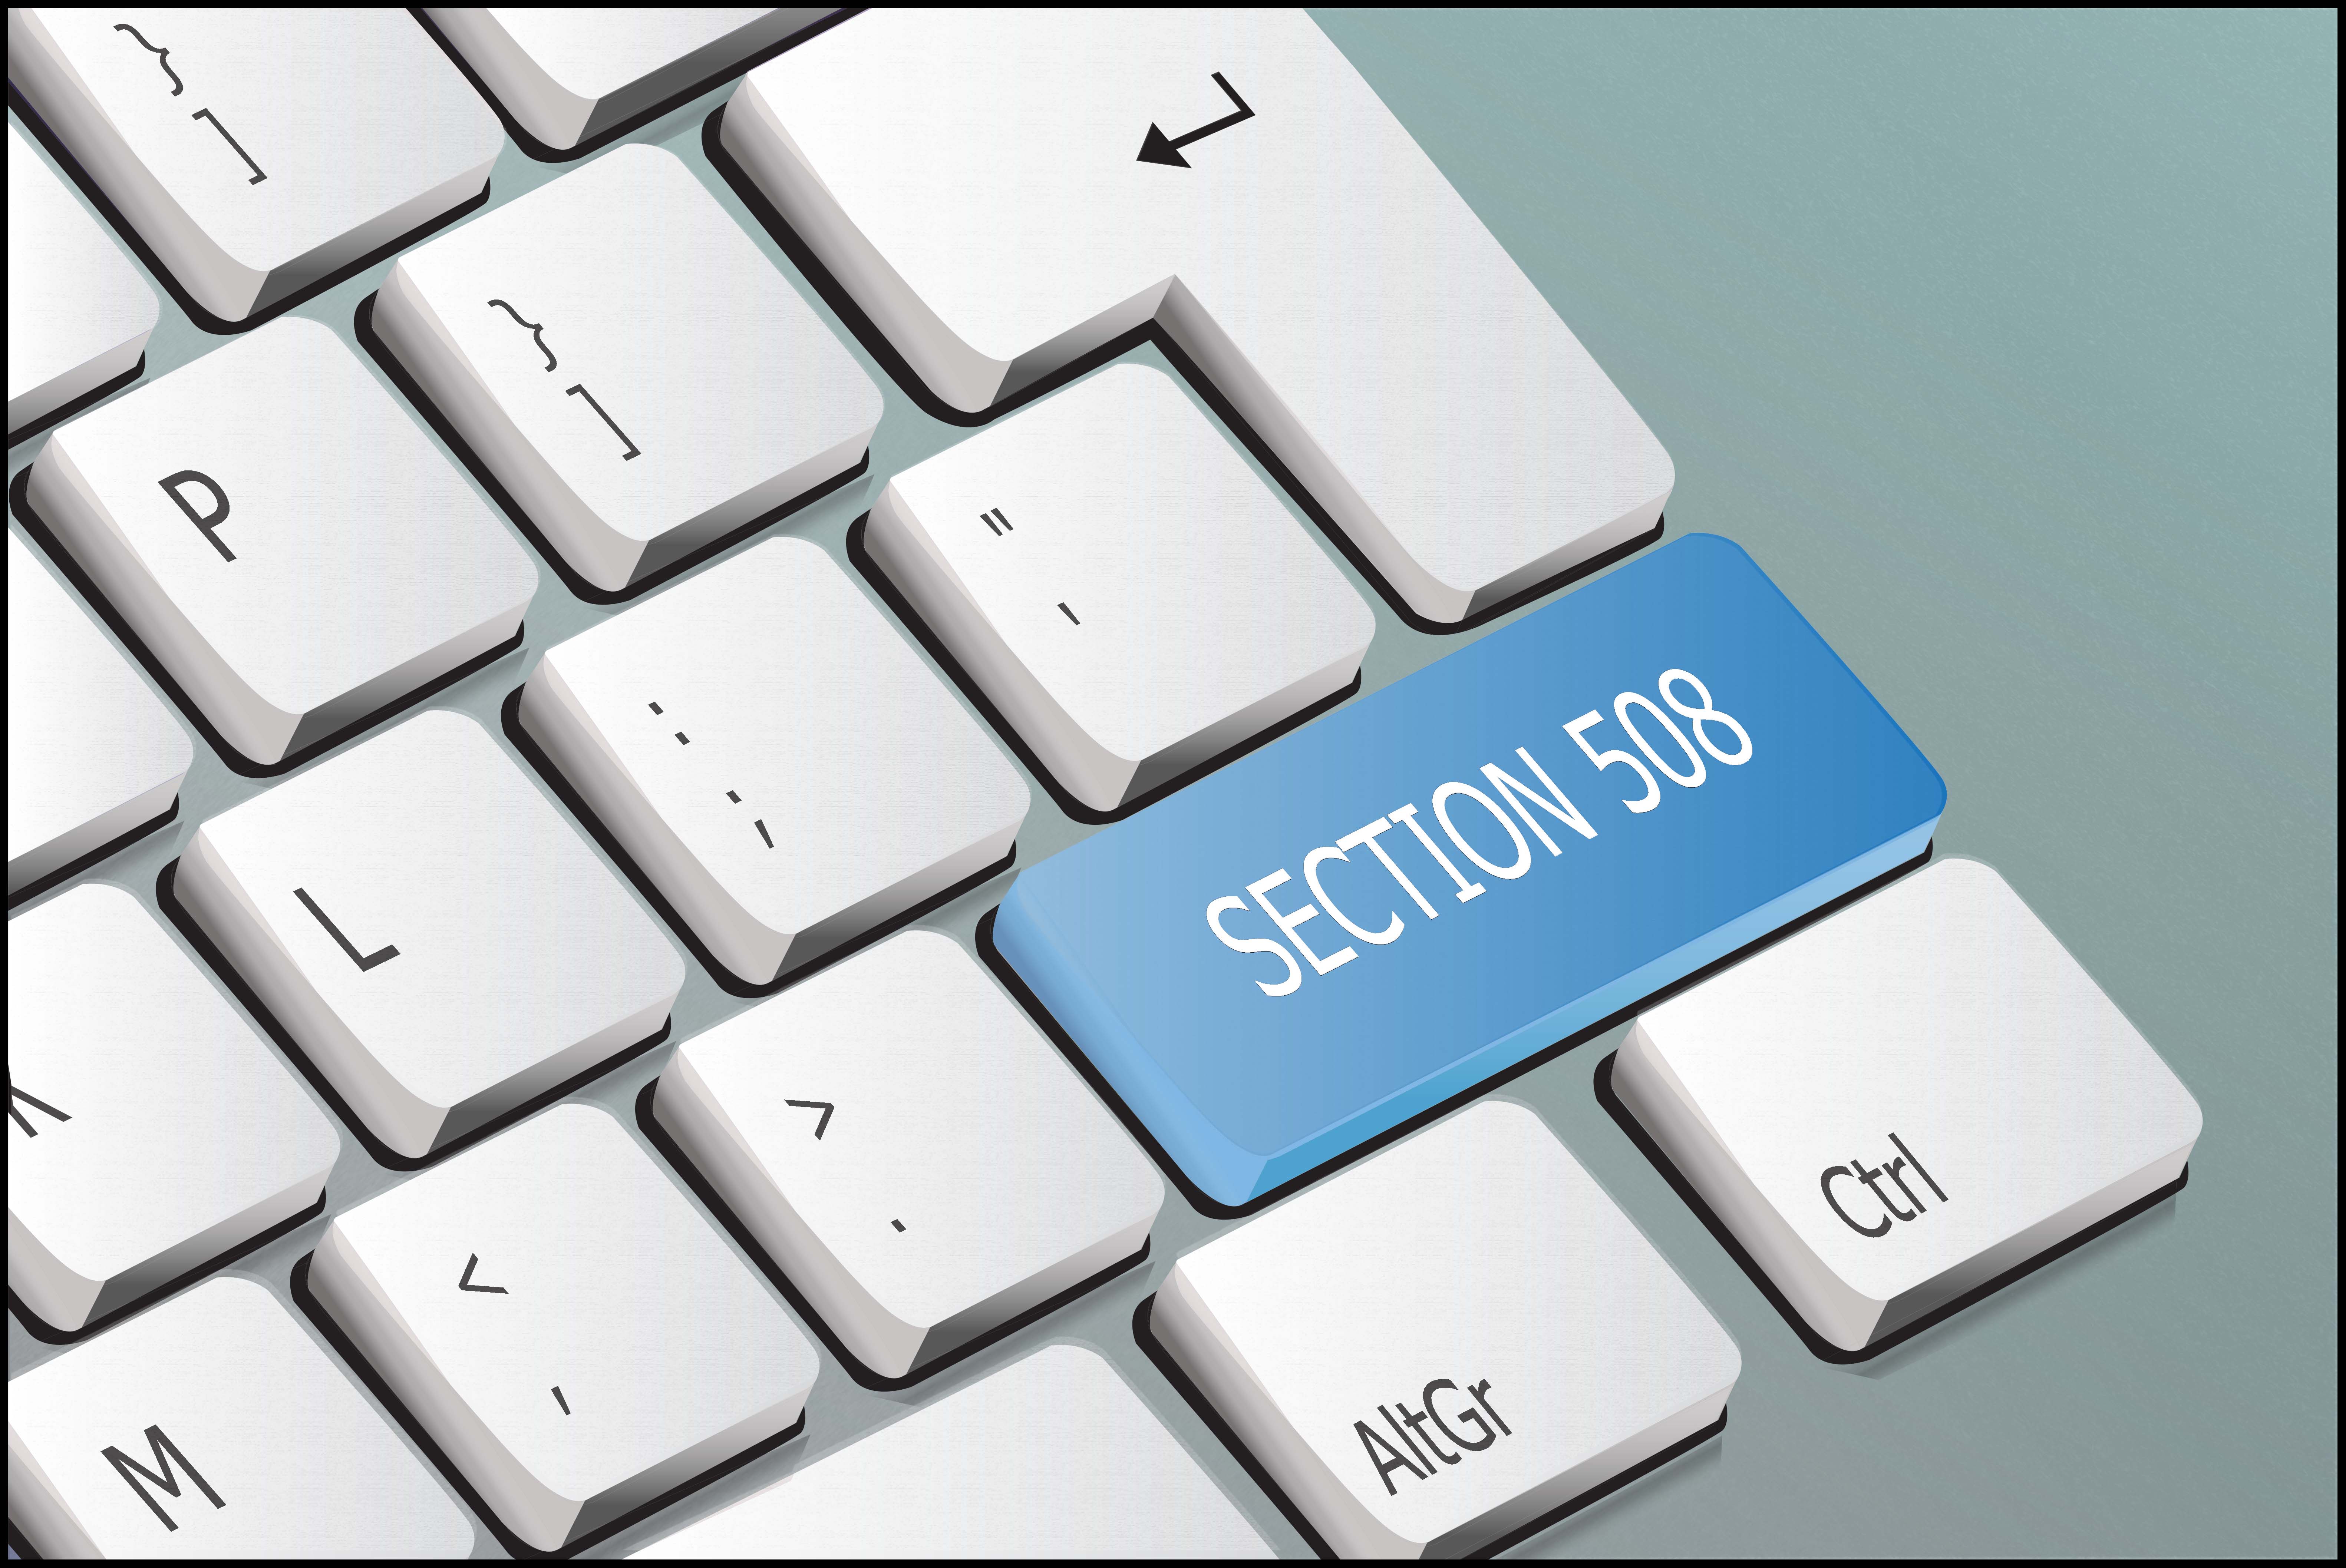 Keyboard with Section 508 key highlighted in blue